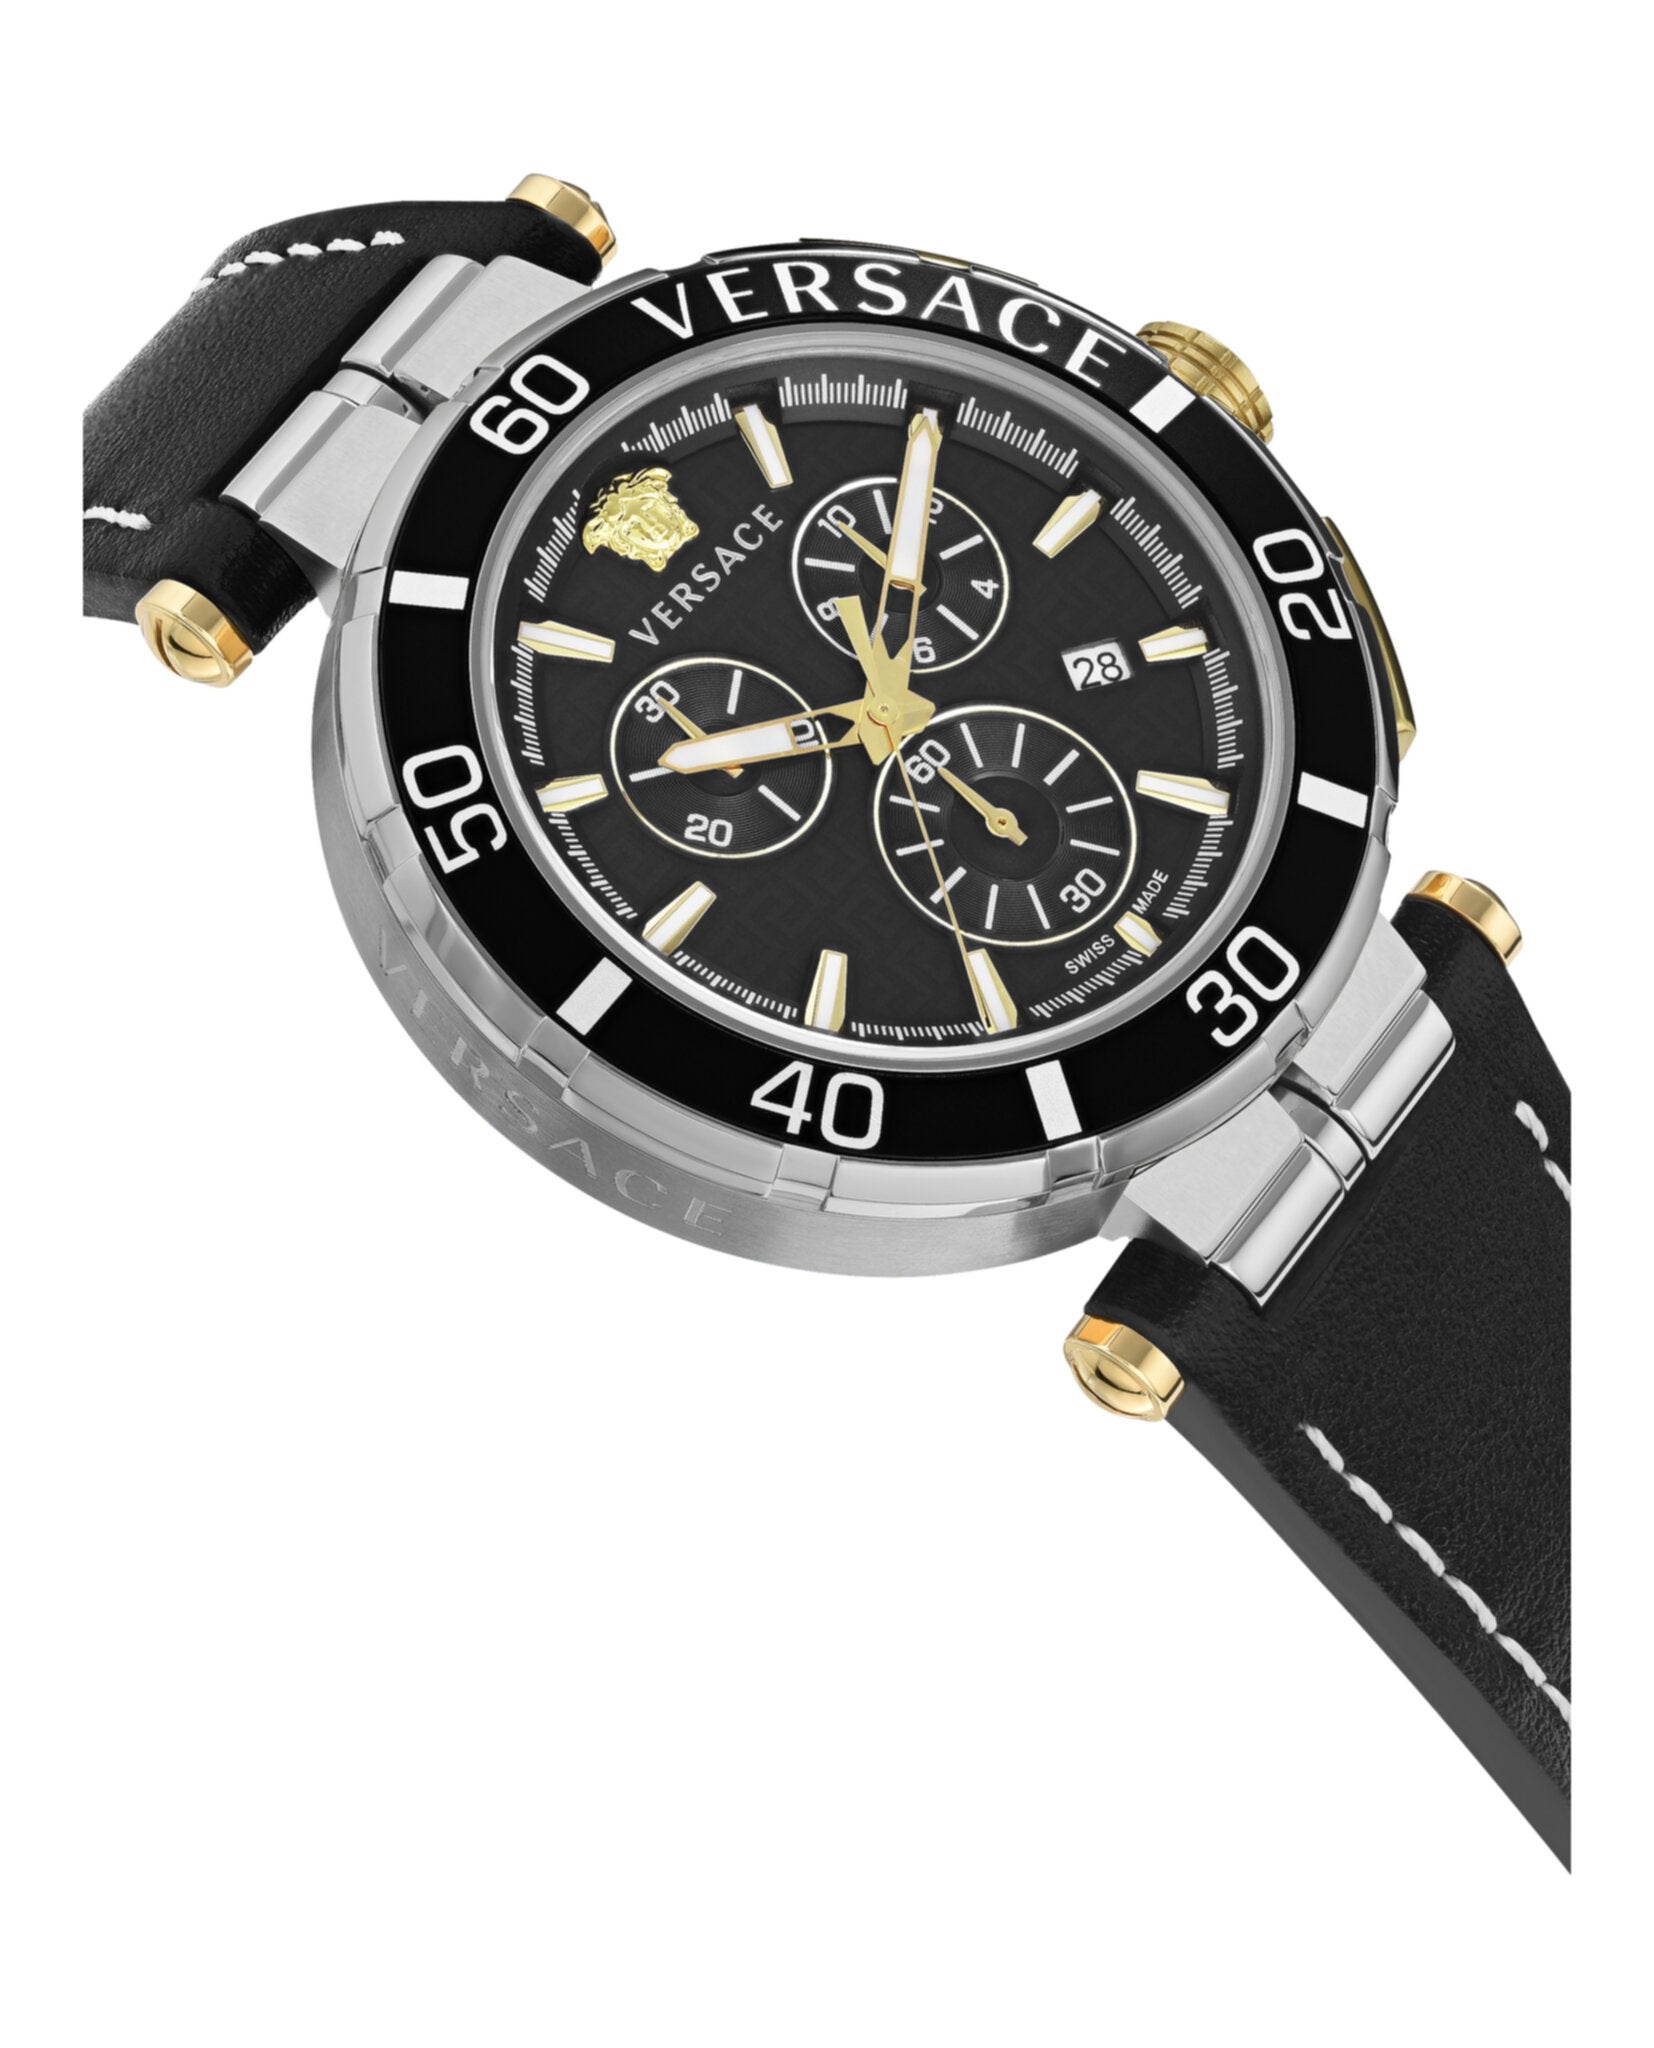 Versace Mens Greca Chrono Watches | MadaLuxe Time – Madaluxe Time